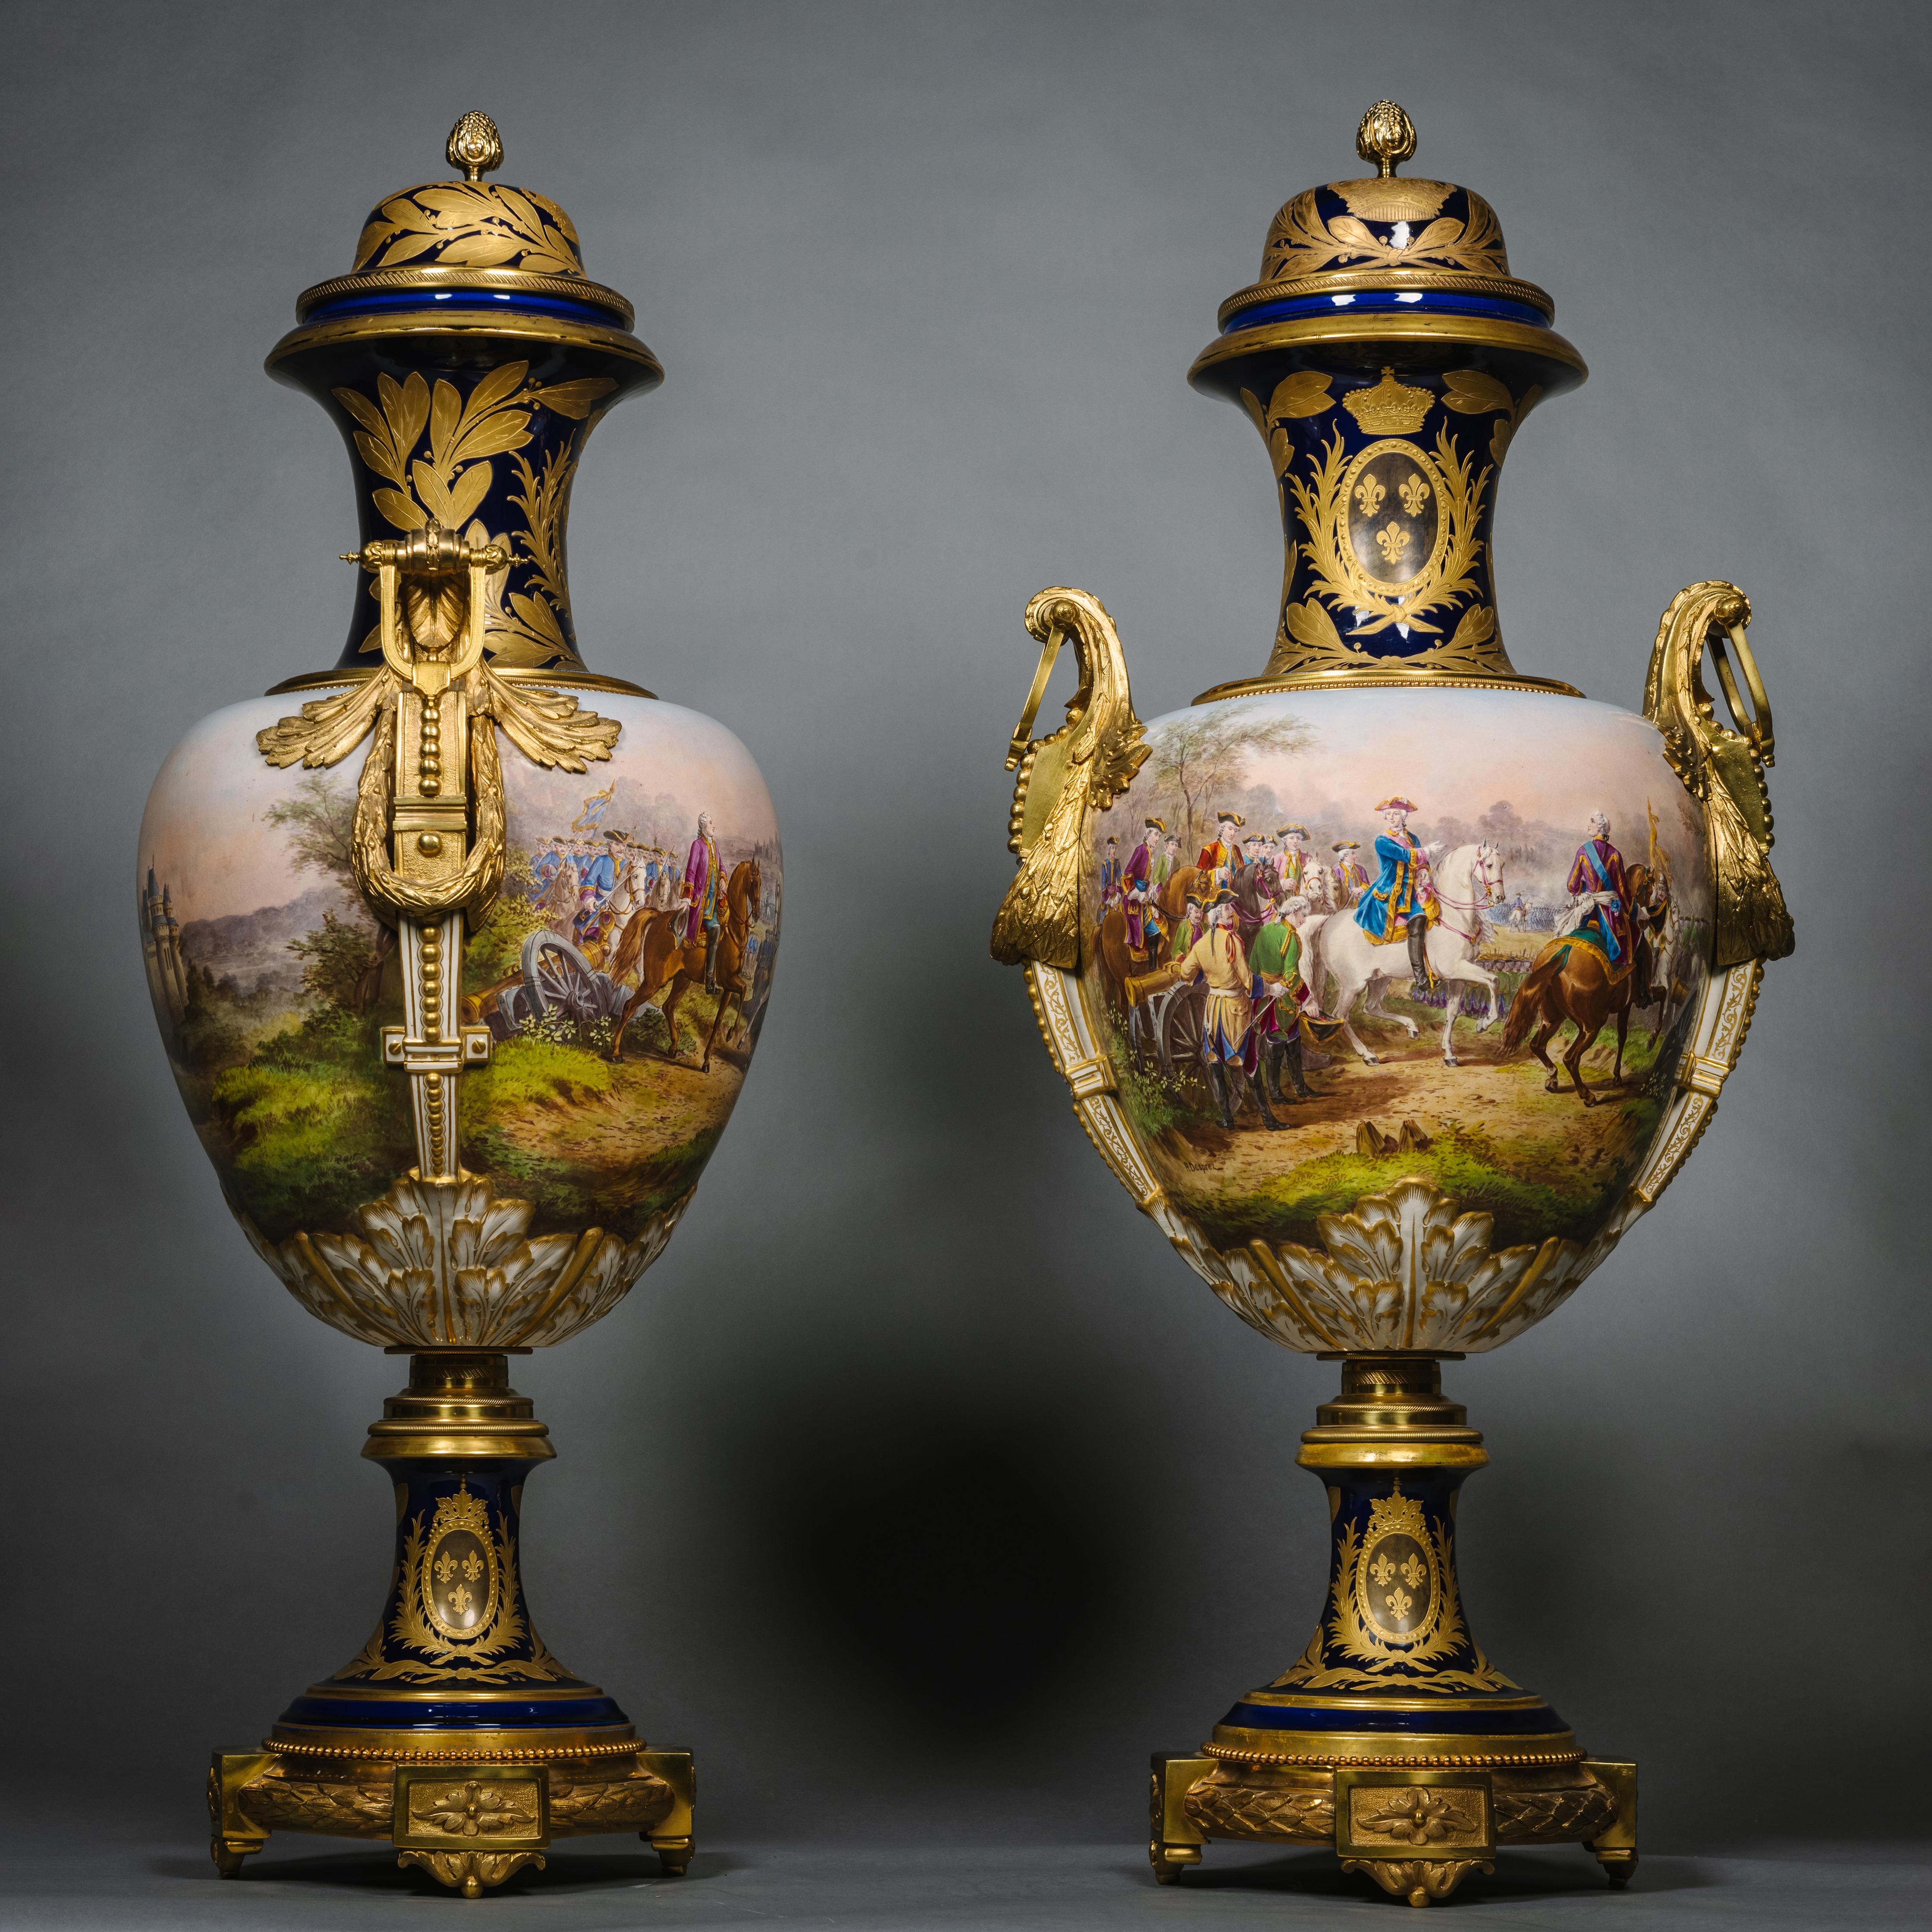 A Pair of Large Gilt-Bronze Mounted Sèvres-Style Cobalt Blue Ground Porcelain Vases and Covers.

Signed 'H. Desprez'.

Each of baluster form. One painted to the front with Louis XV and Maurice de Saxe at the Battle of Fontenoy. The other painted to